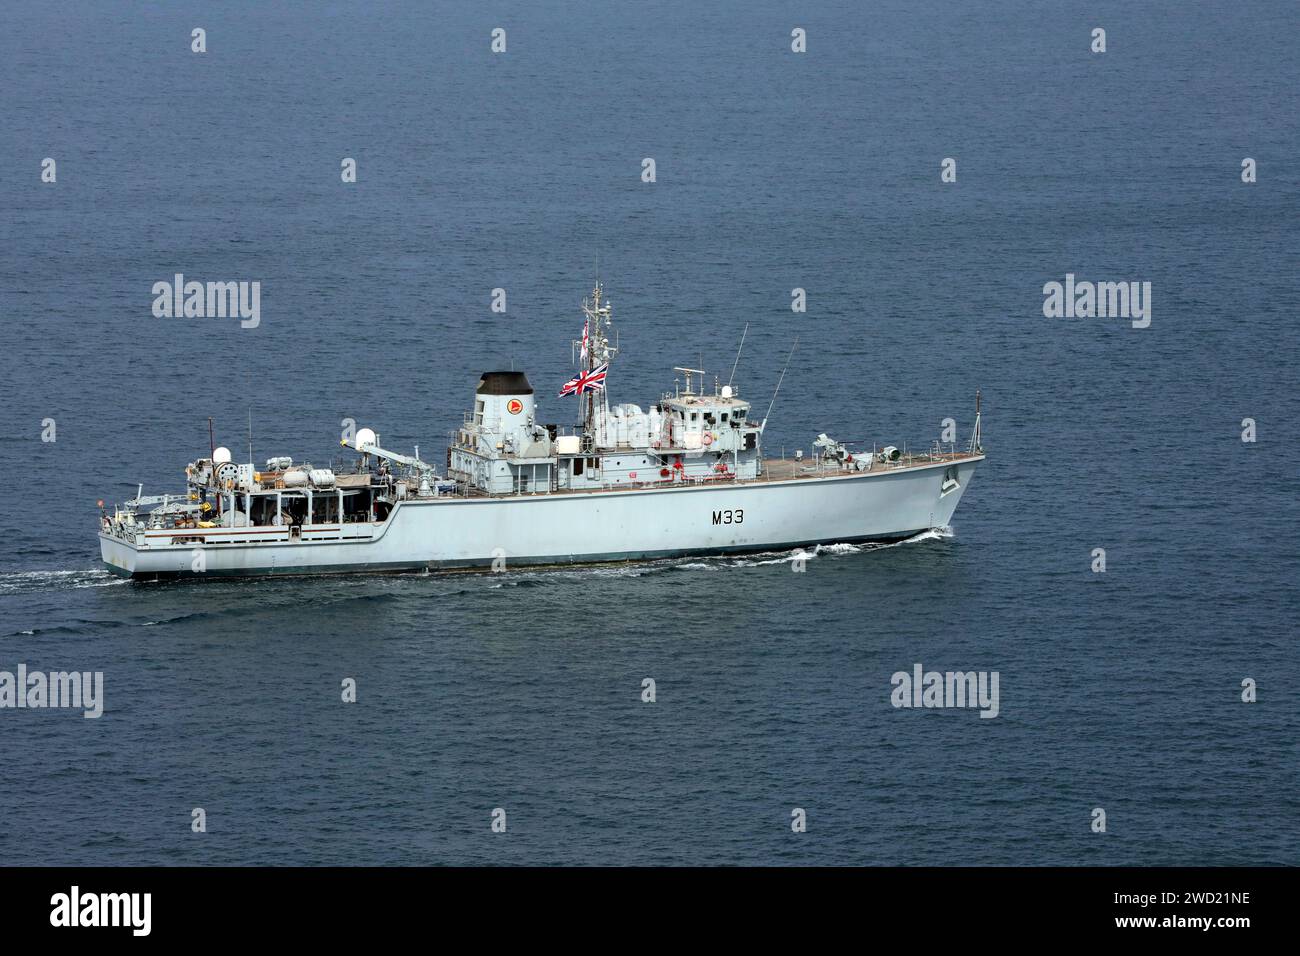 HMS Brocklesby of the British Royal Navy. Stock Photo